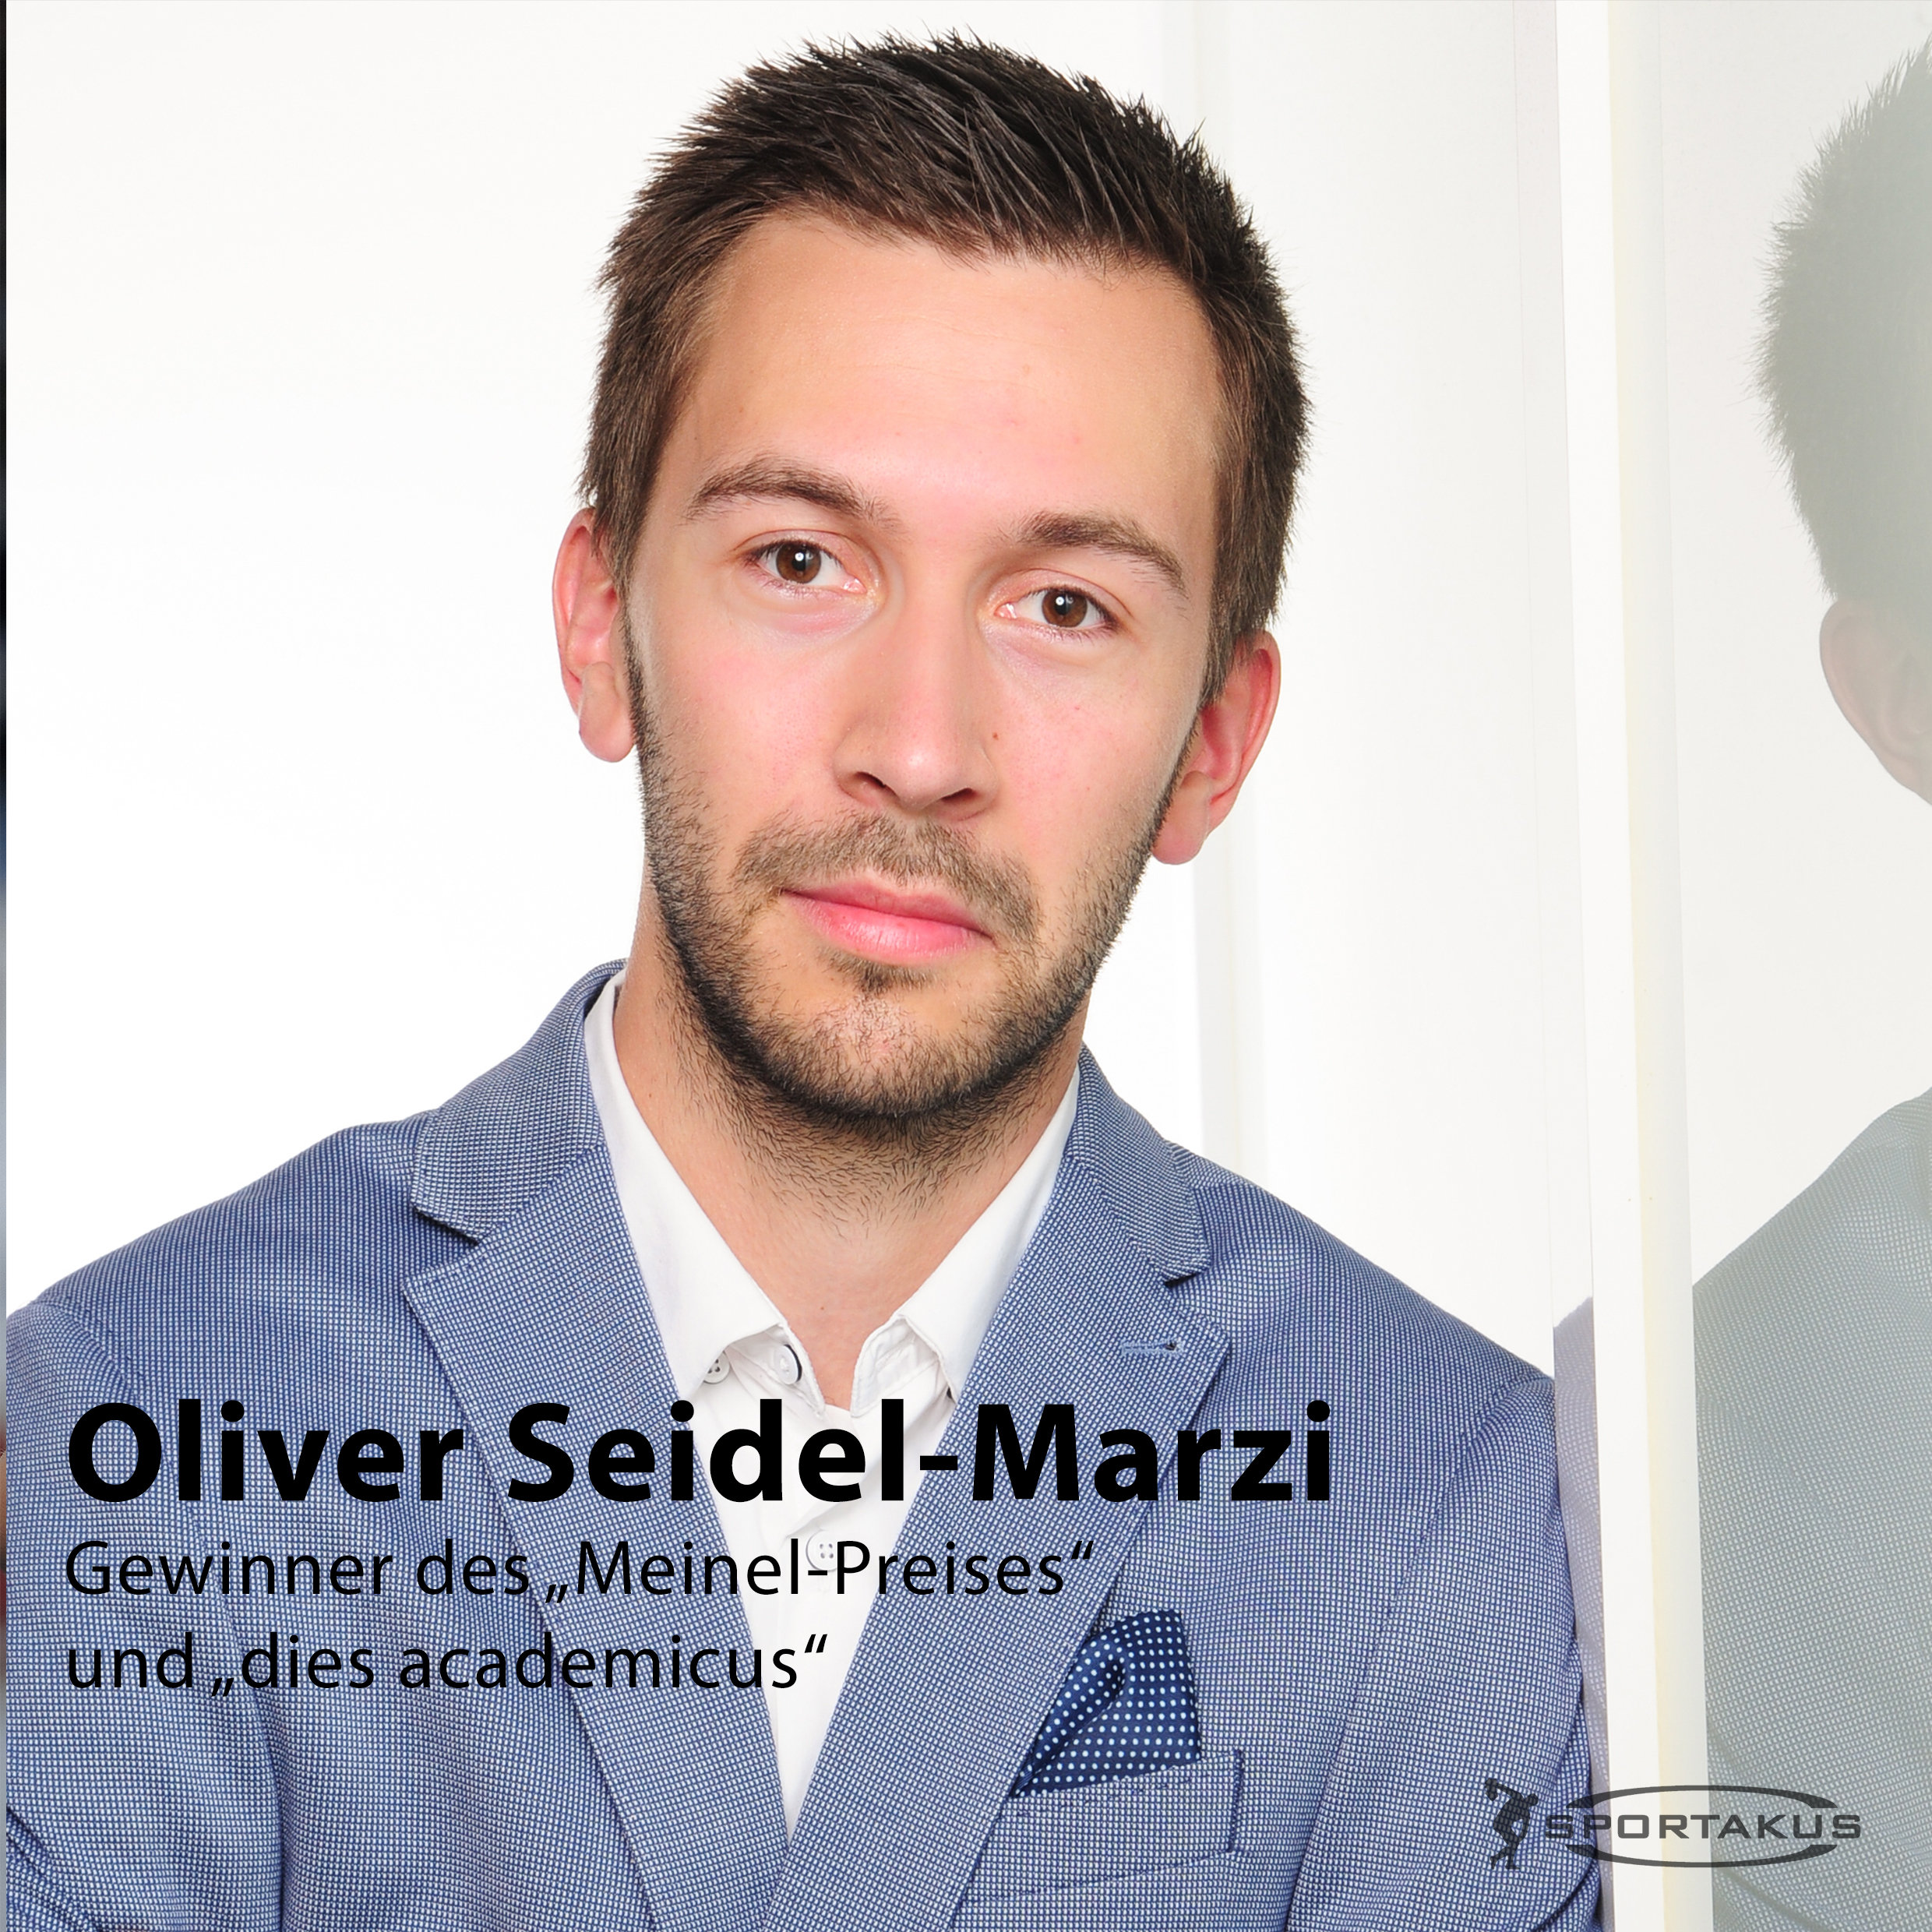 You are currently viewing Der SPORTAKUS im Interview mit Oliver Seidel-Marzi